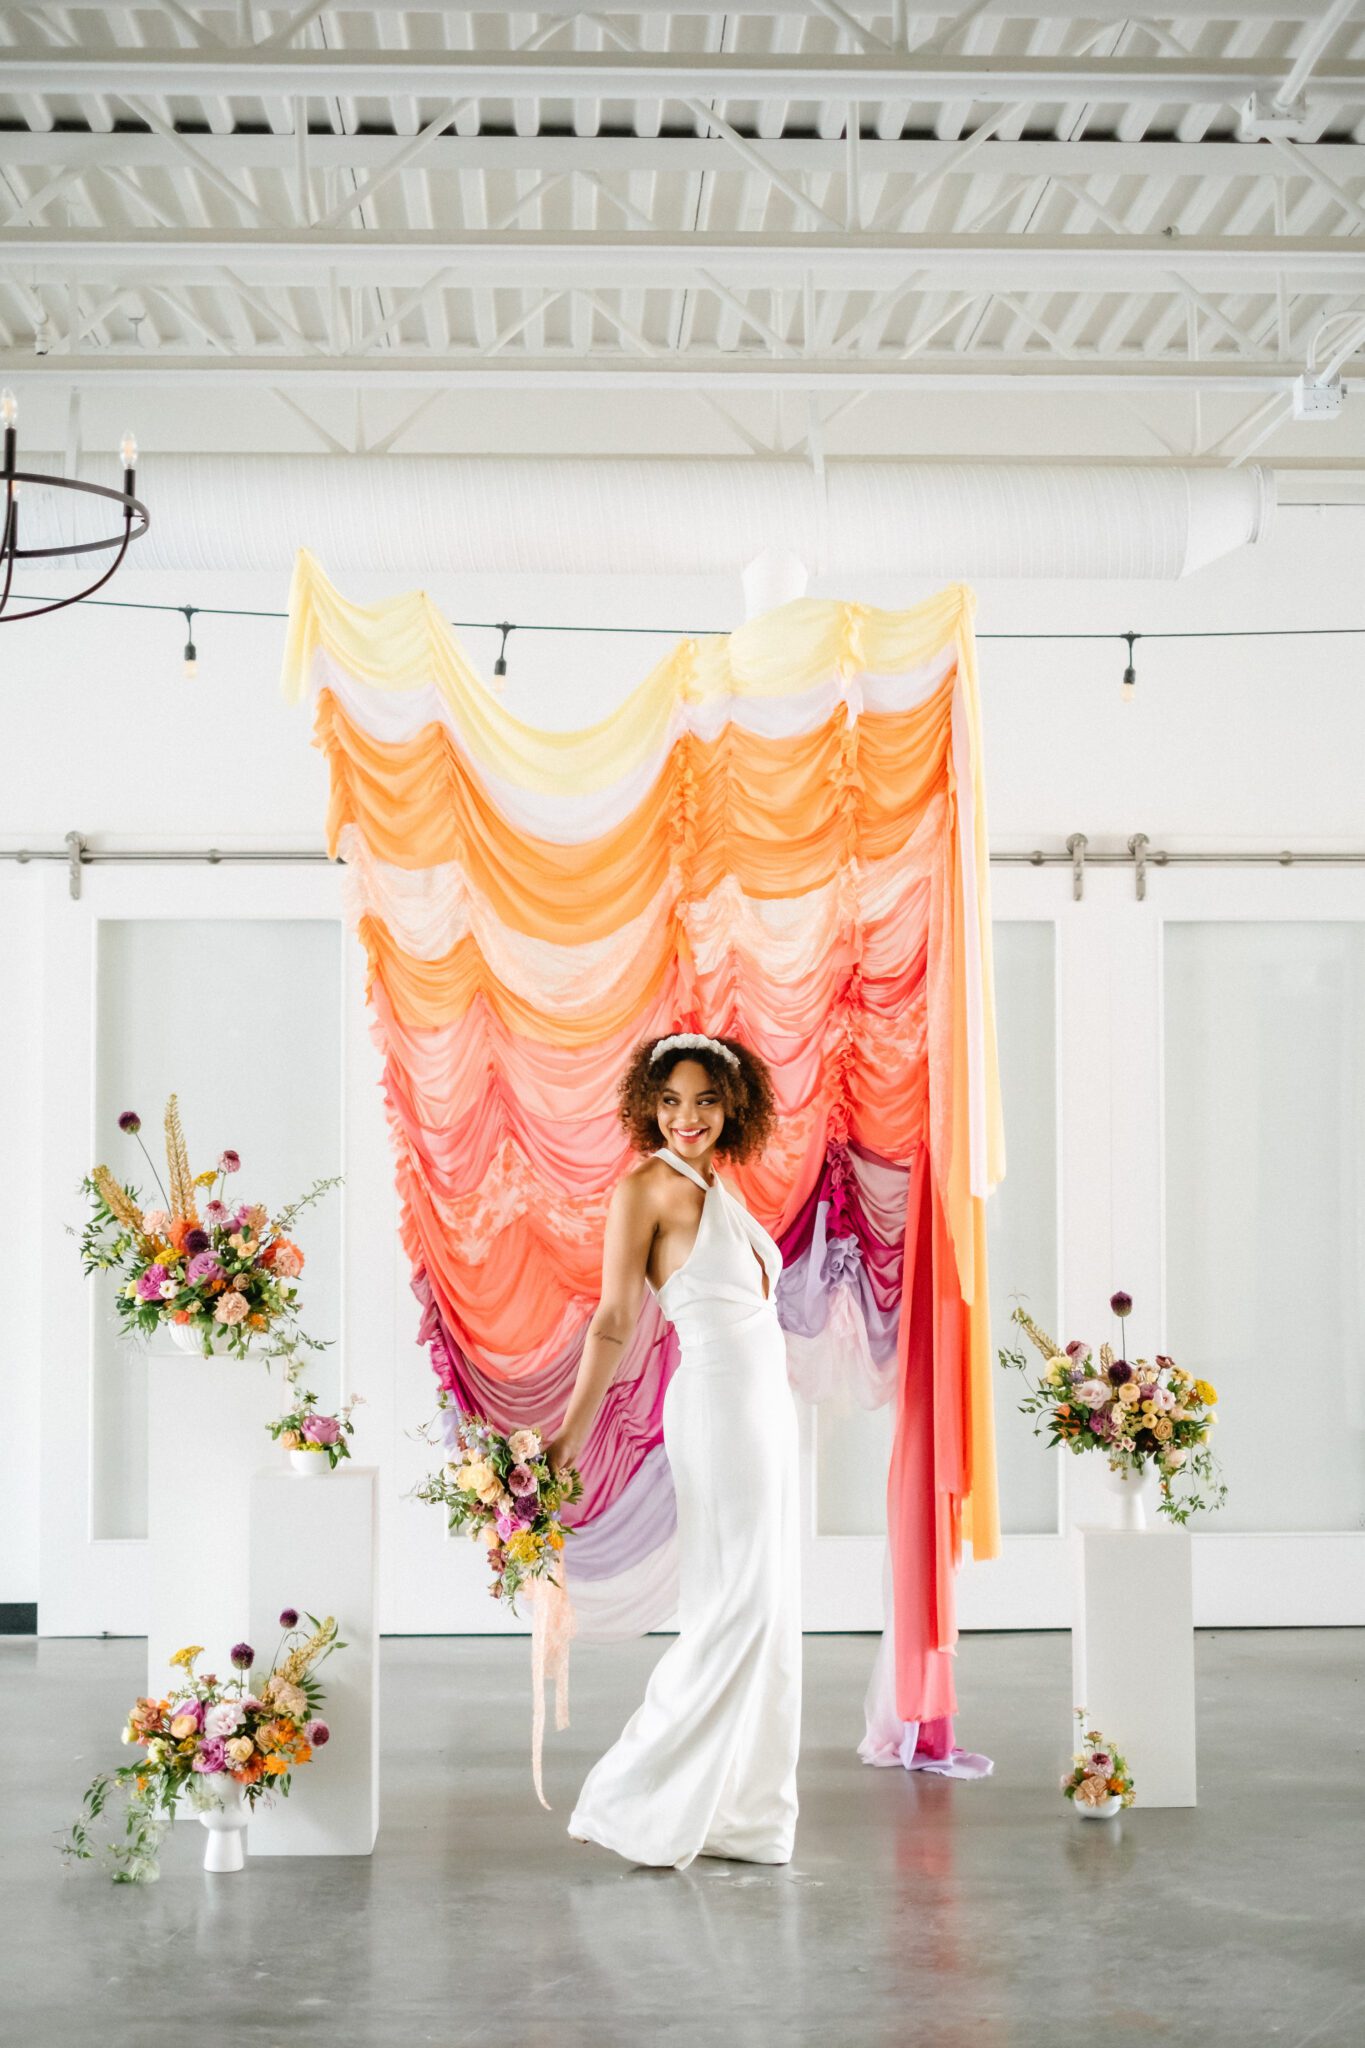 Yellow, tangerine, peach, pink, and purple ruched fabric ceremony backdrop, featuring whimsical florals by Meadow & Vine at The Brownstone in Calgary, Alberta. Bride wearing retro-inspired bridal jumpsuit and custom floral headpiece.